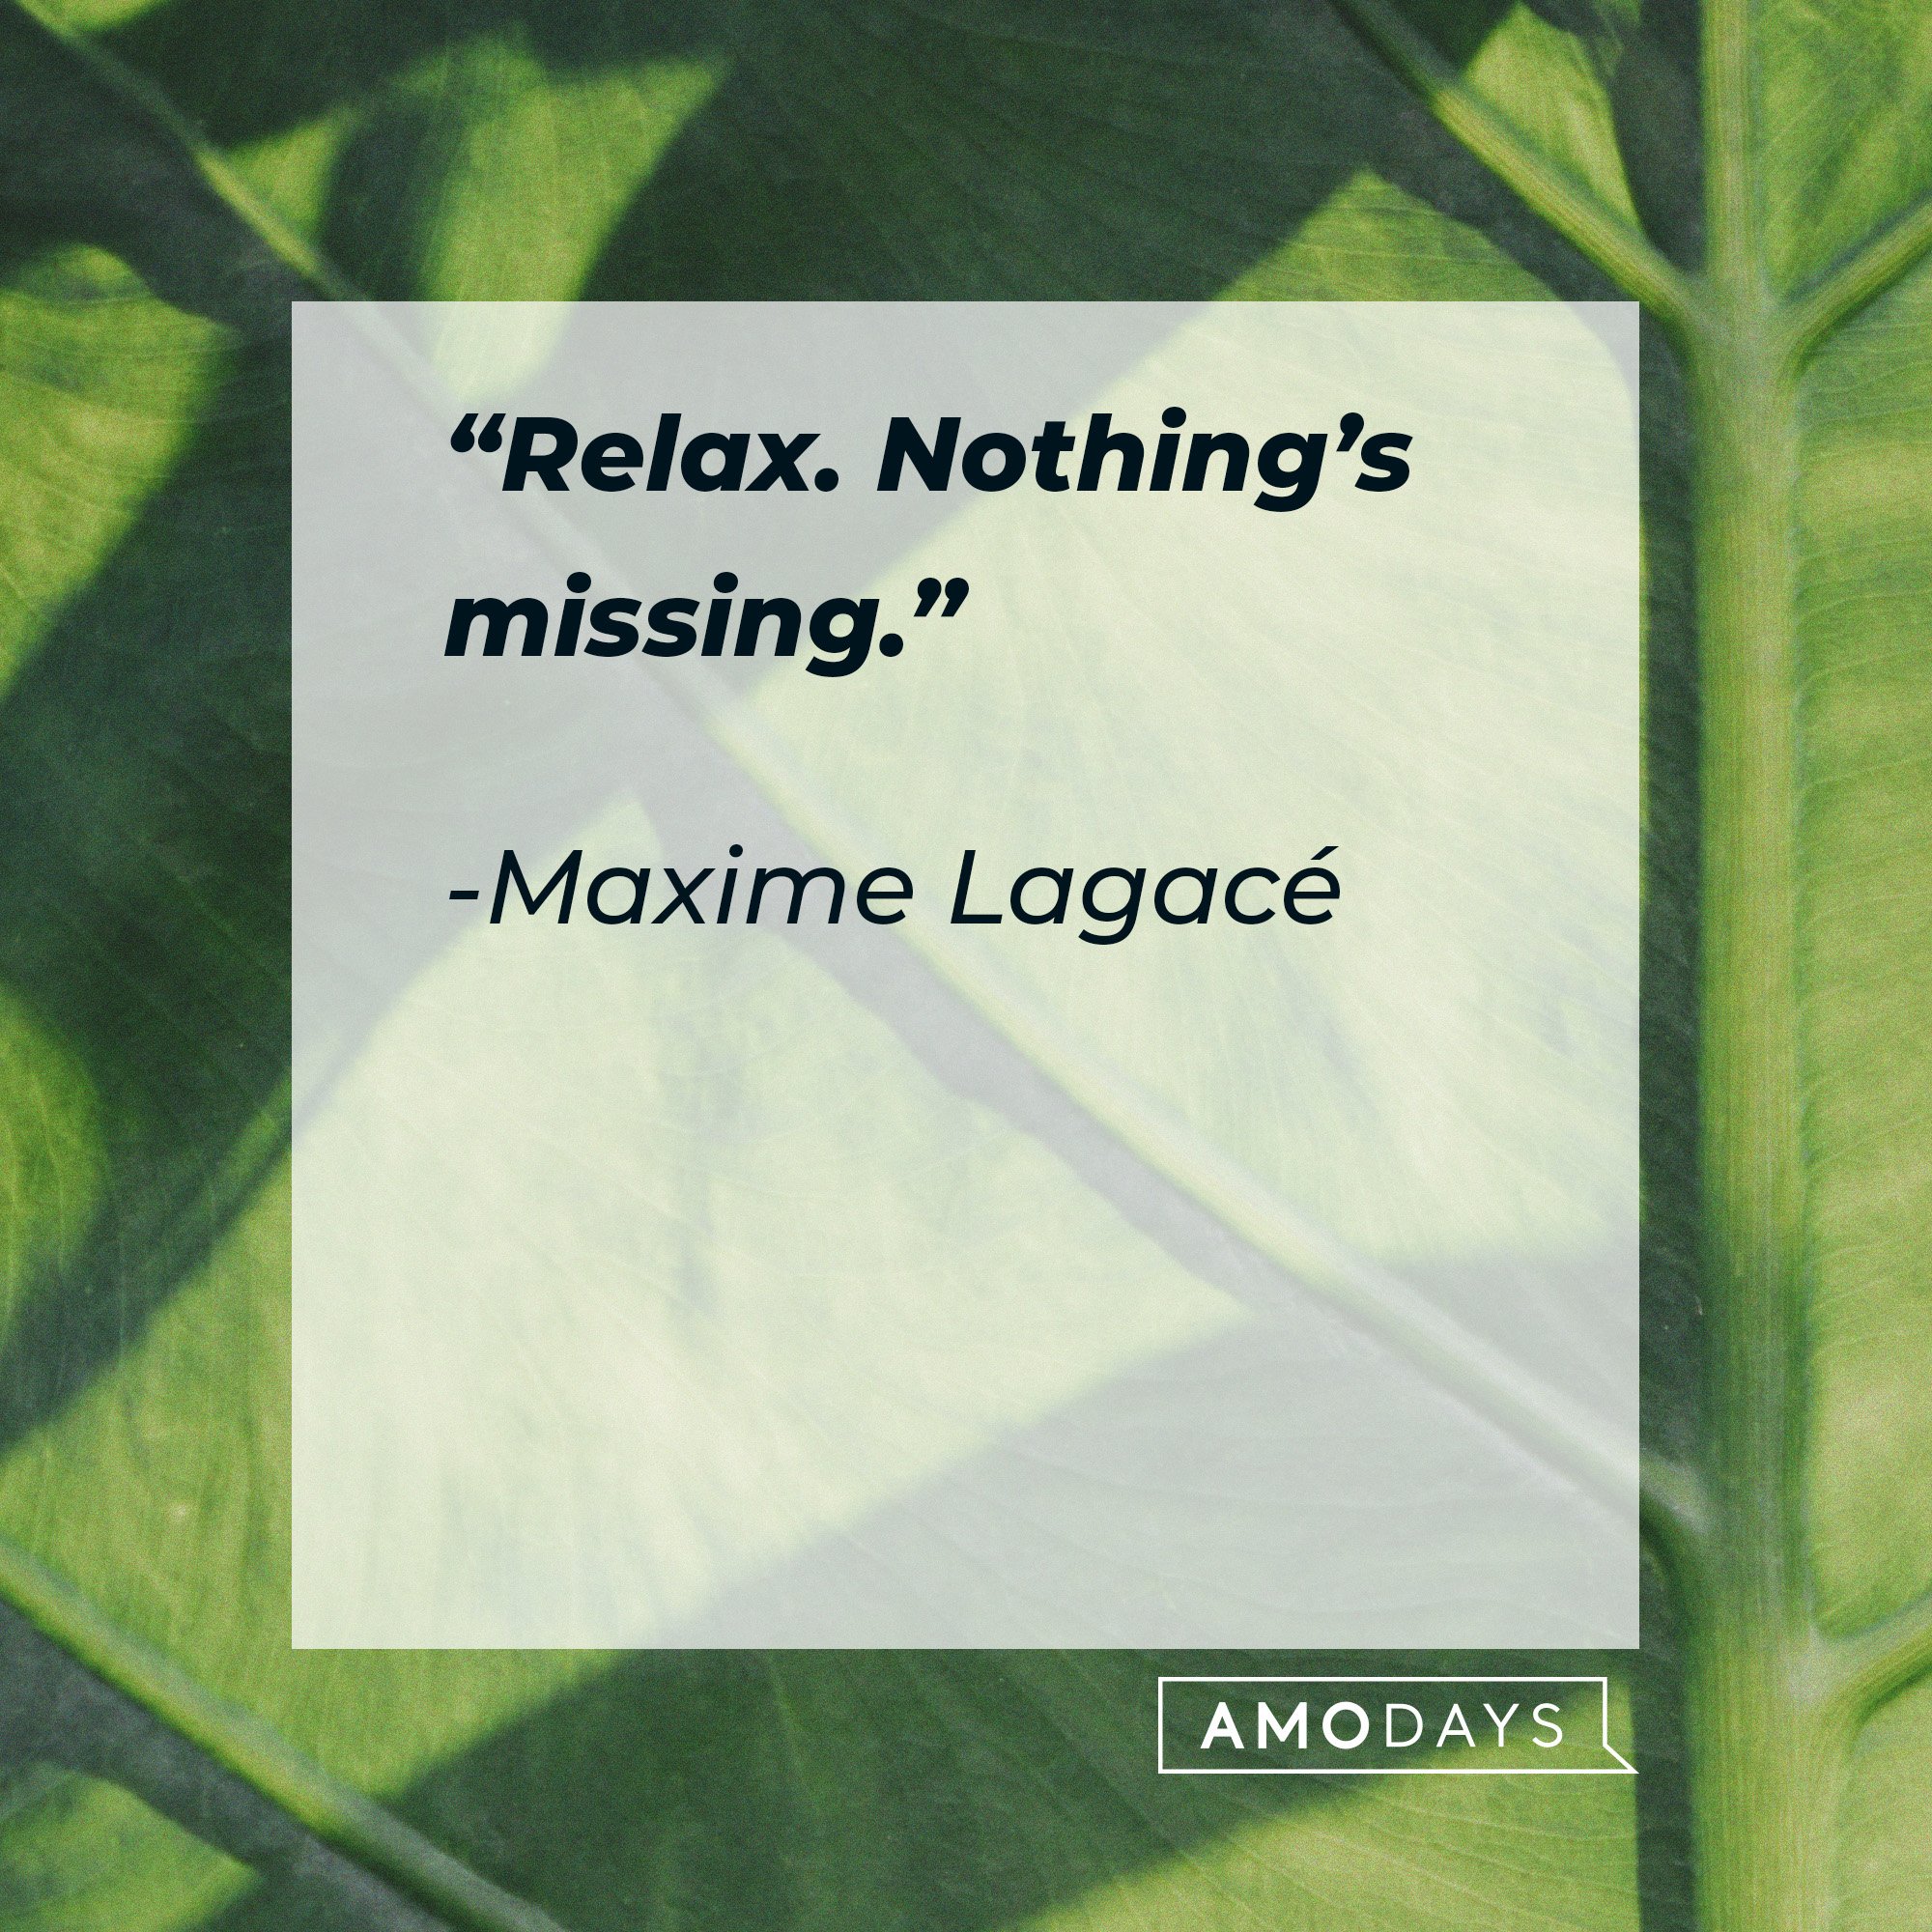 Maxime Lagacé's quote: “Relax. Nothing’s missing.” | Image: AmoDays